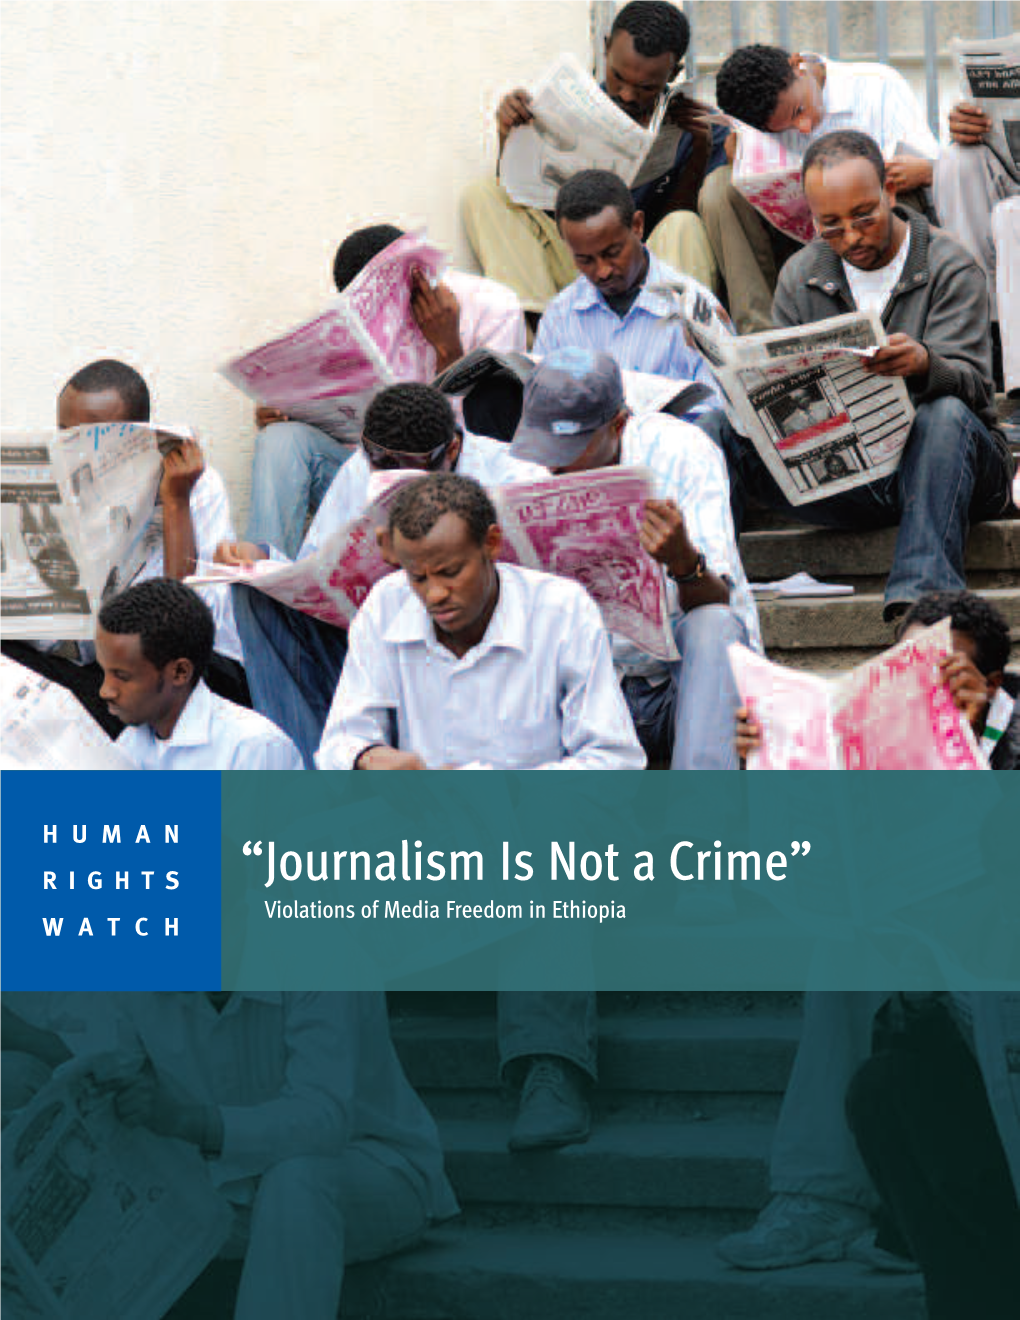 Journalism Is Not a Crime” Violations of Media Freedom in Ethiopia WATCH